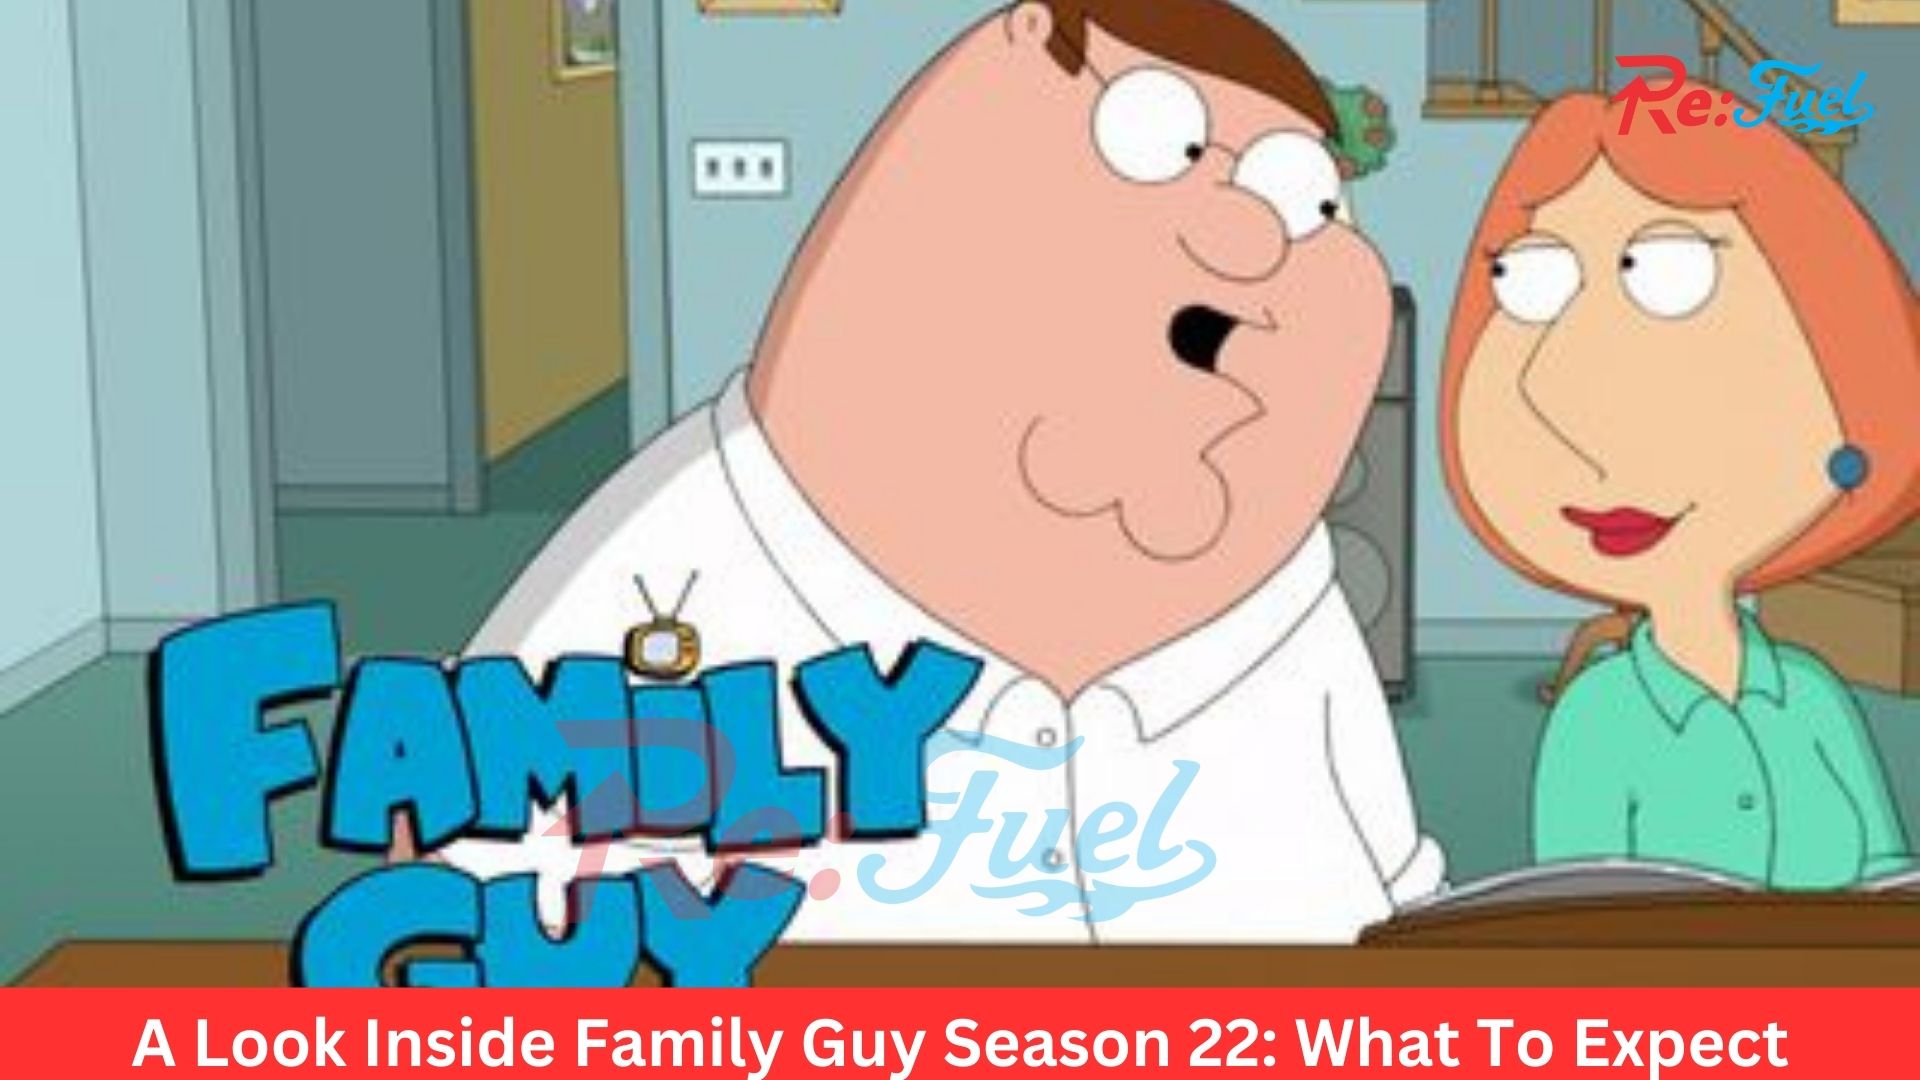 A Look Inside Family Guy Season 22: What To Expect